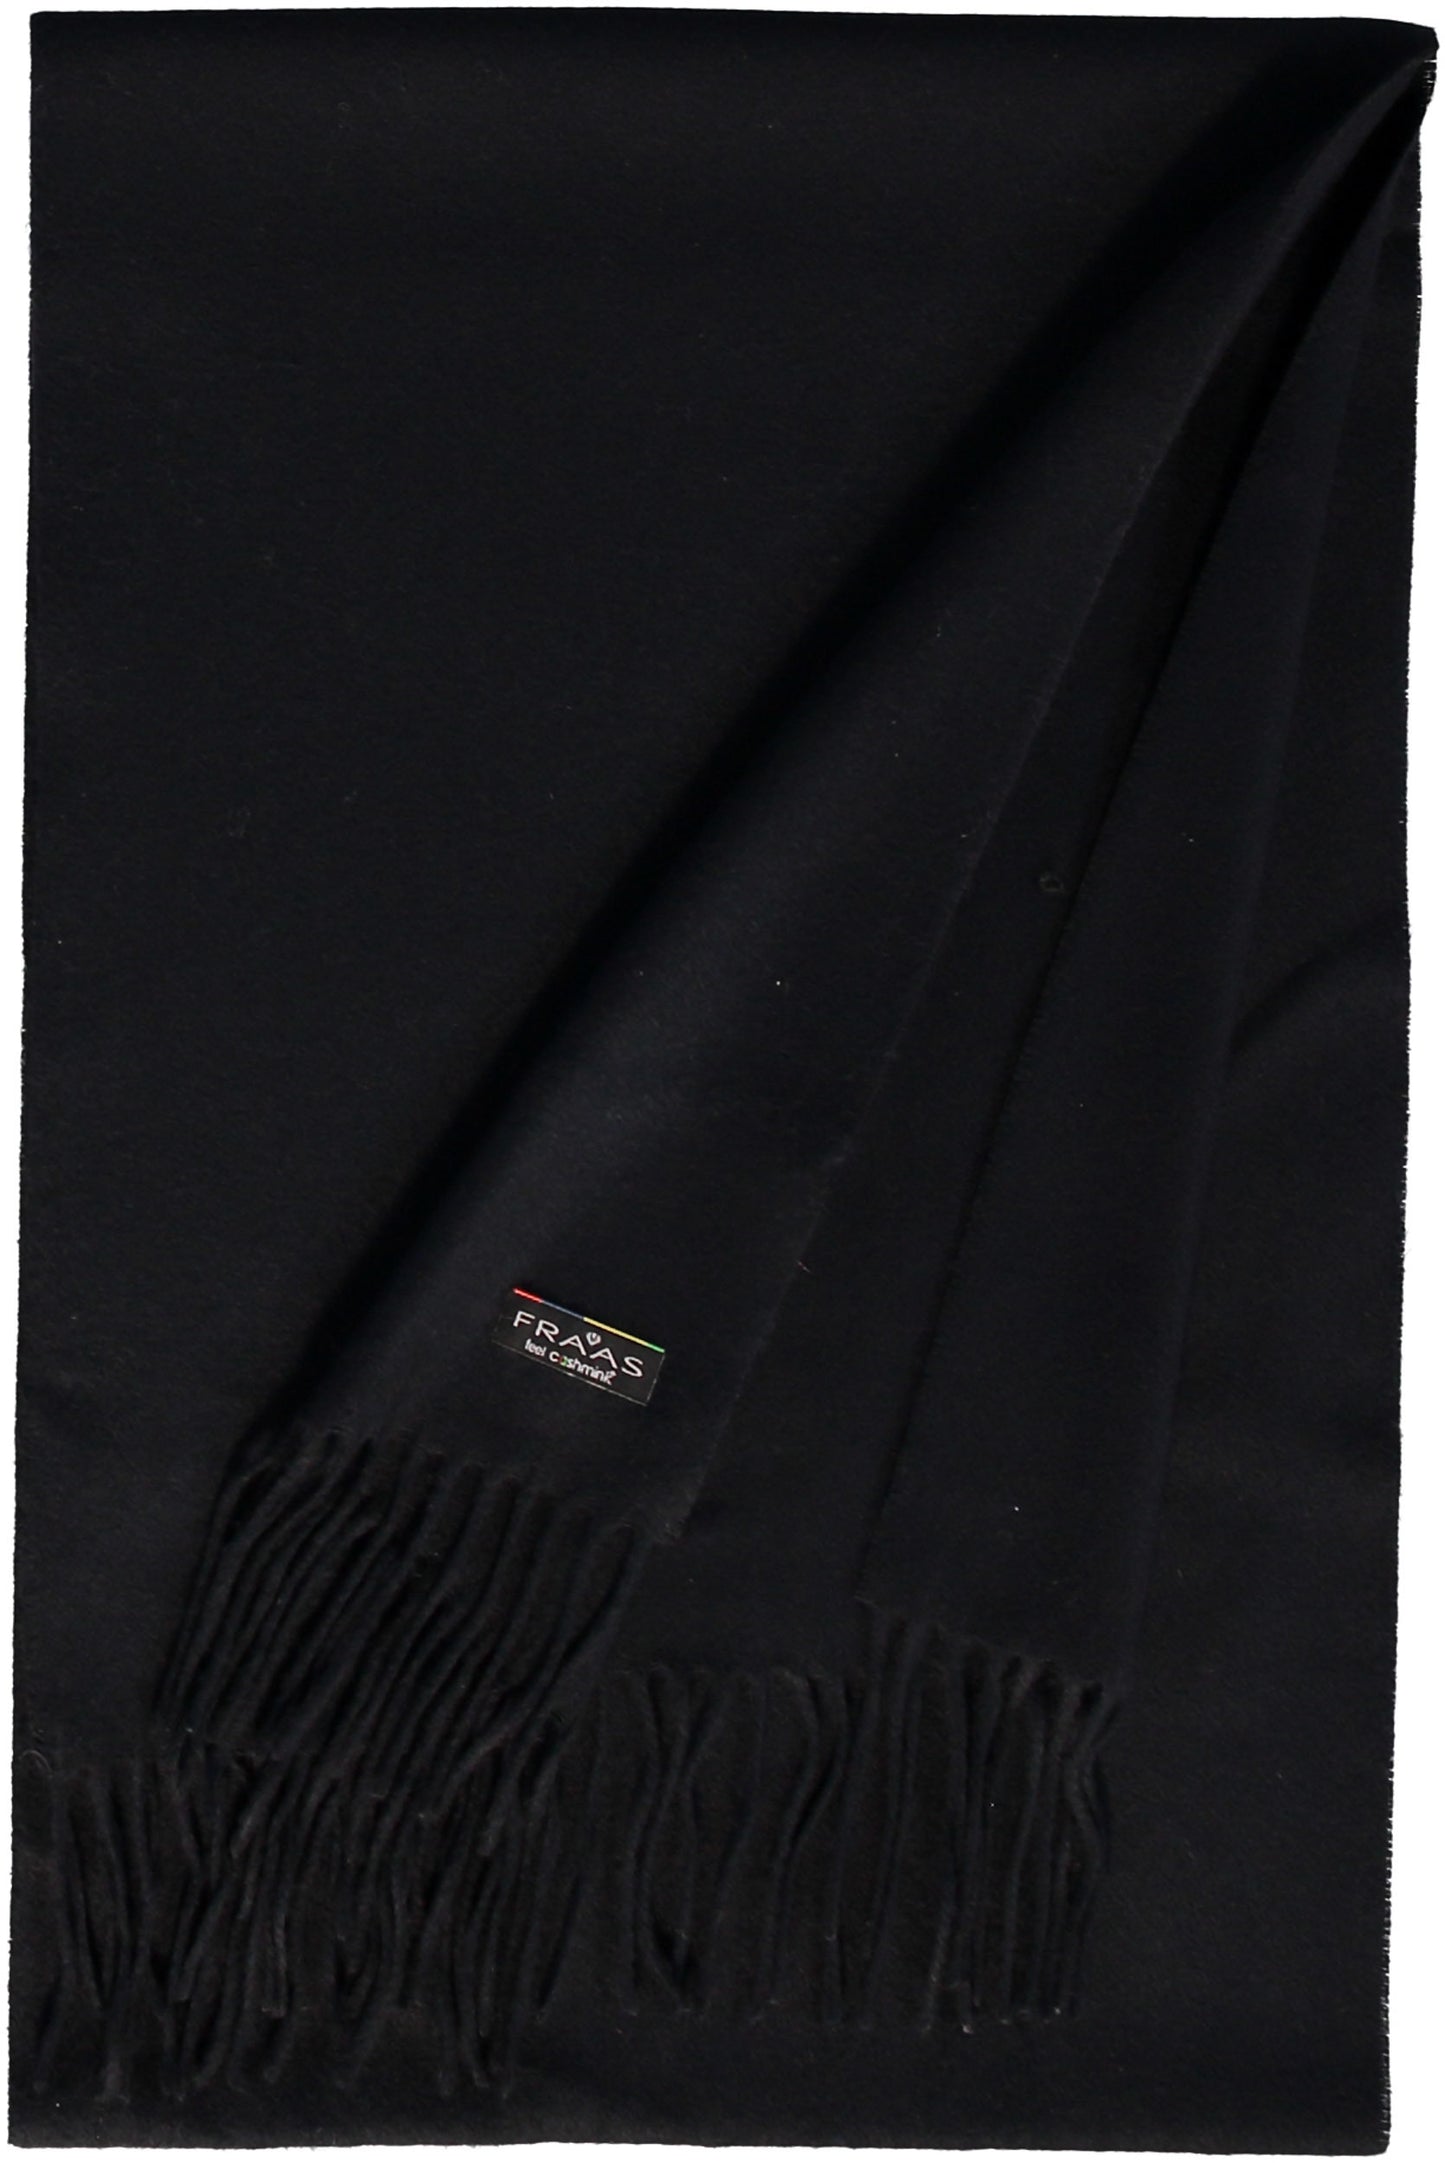 Navy scarf by Fraas